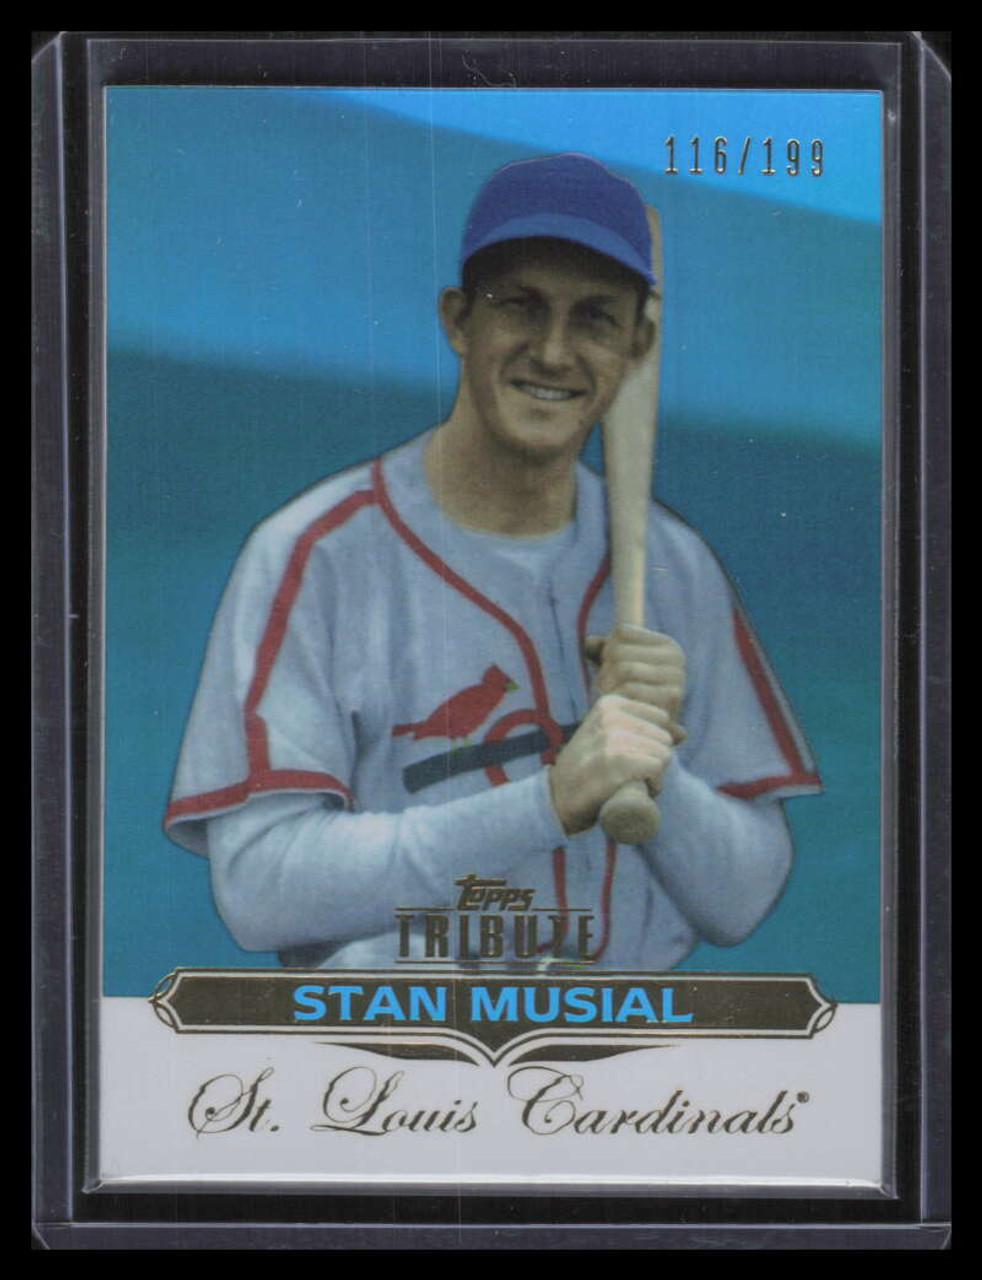 2011 Topps Tribute Blue 11 Stan Musial 116/199